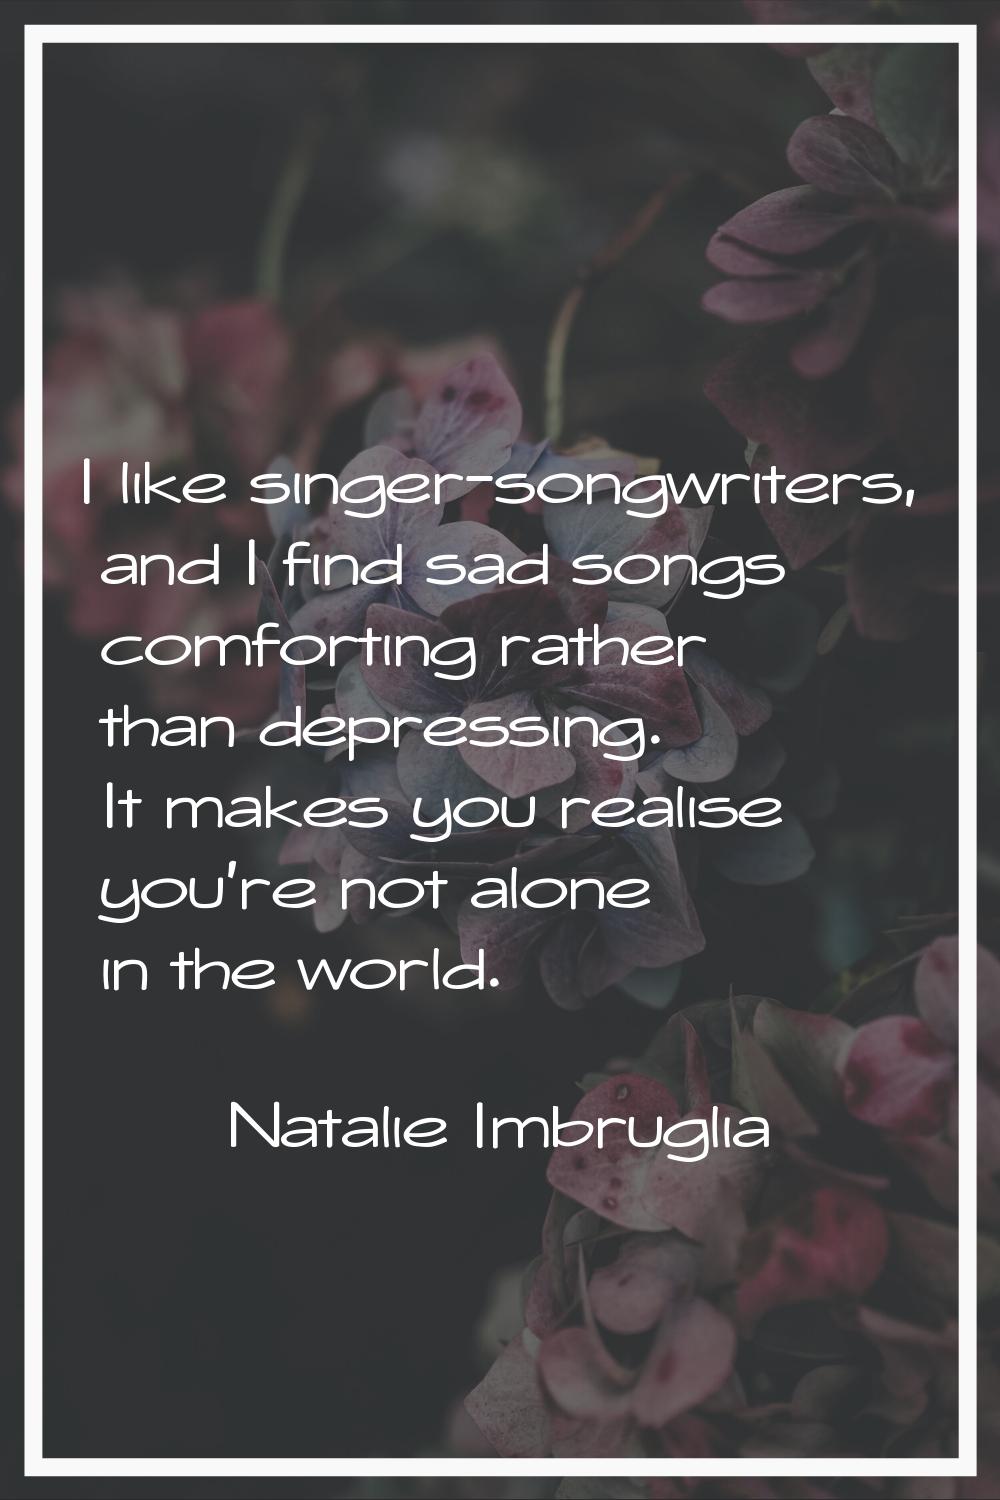 I like singer-songwriters, and I find sad songs comforting rather than depressing. It makes you rea